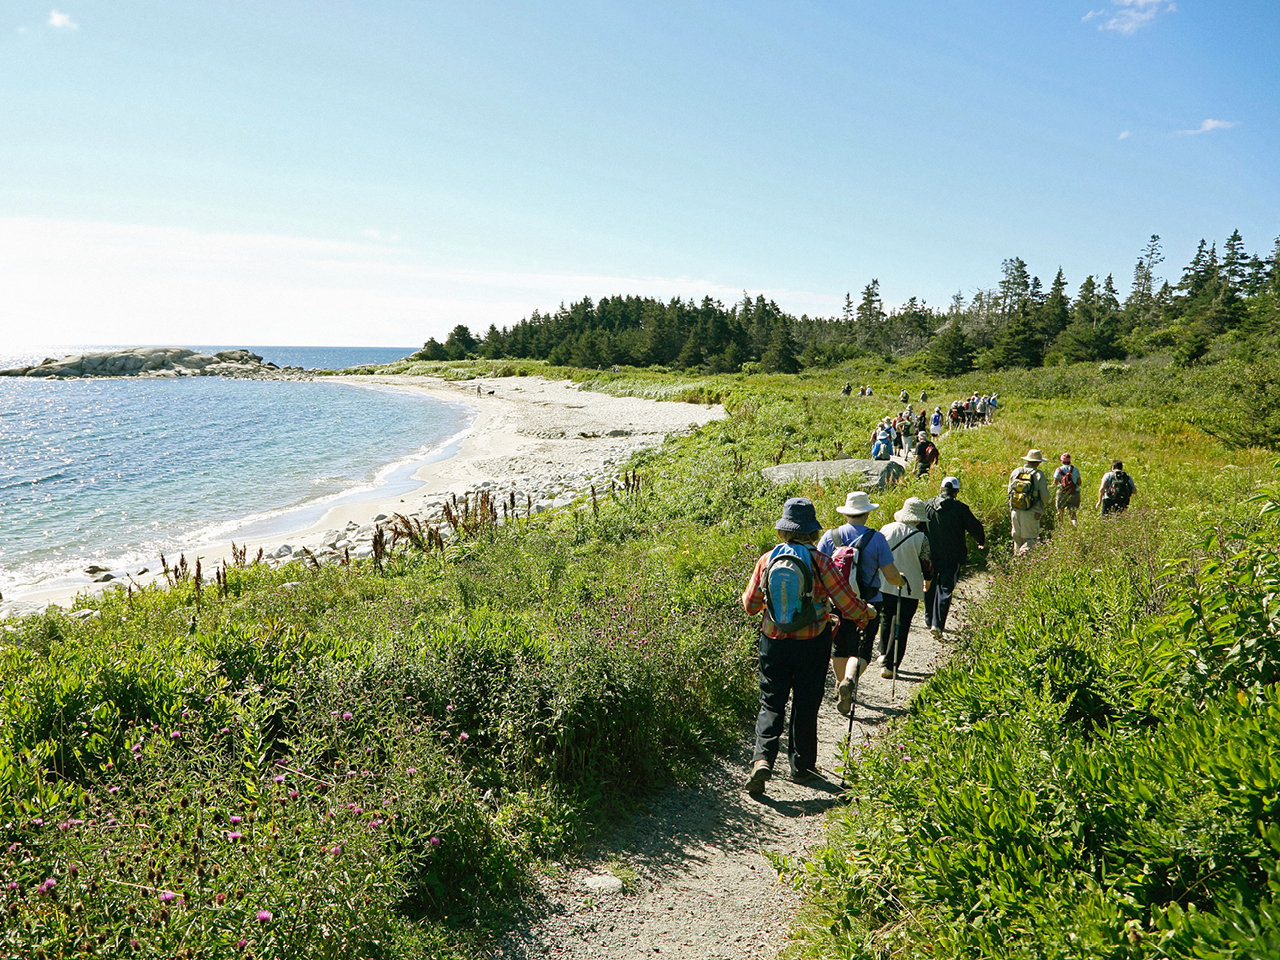 Many hikers walking in a line atop a rocky path; in the distance, a beach